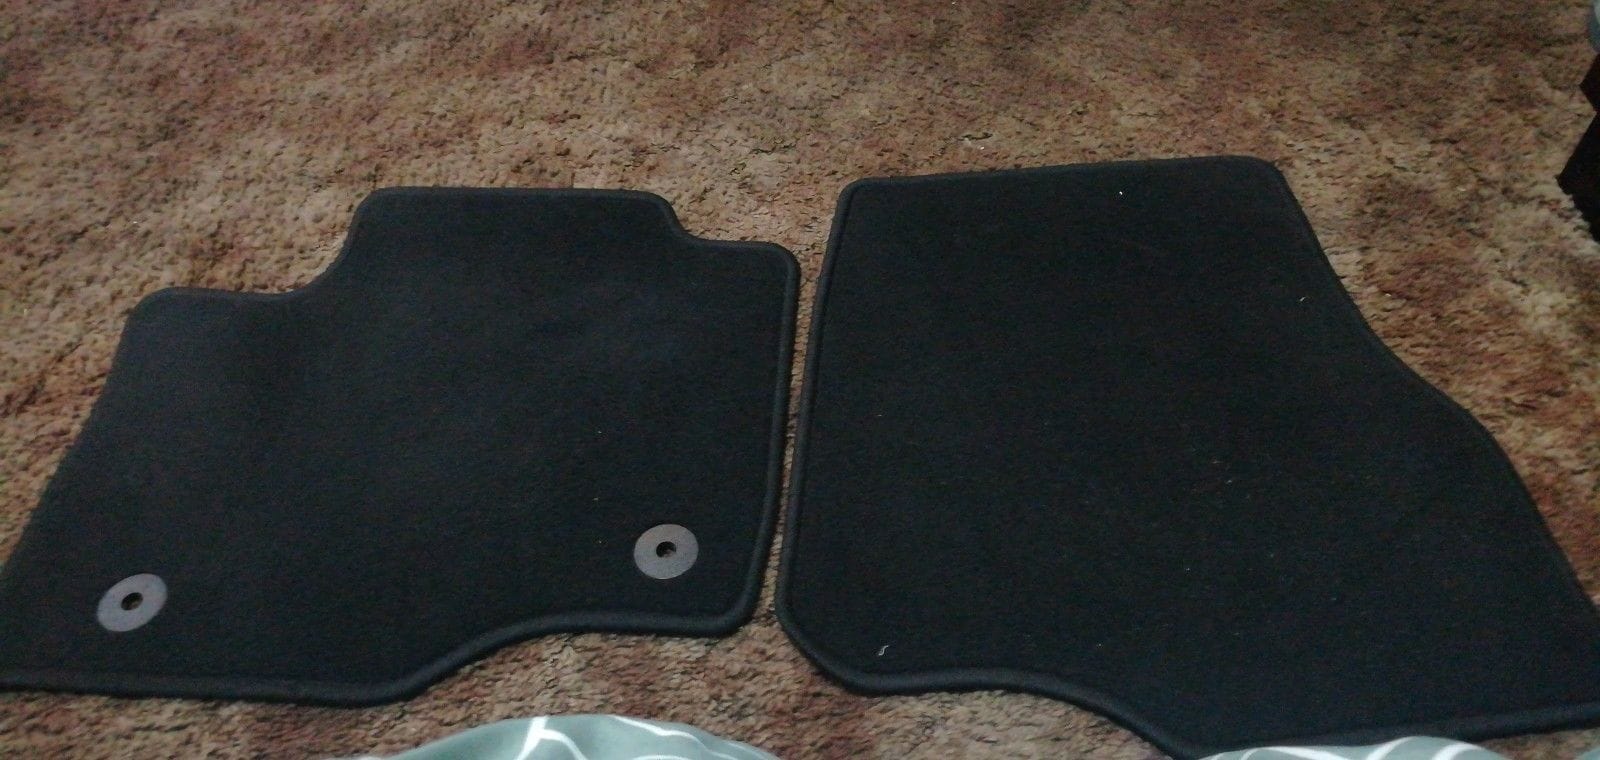 Interior/Upholstery - 2017-2018 F250 black Floor Mats(used) - Used - 2017 to 2019 Ford F-250 Super Duty - Duarte, CA 91010, United States